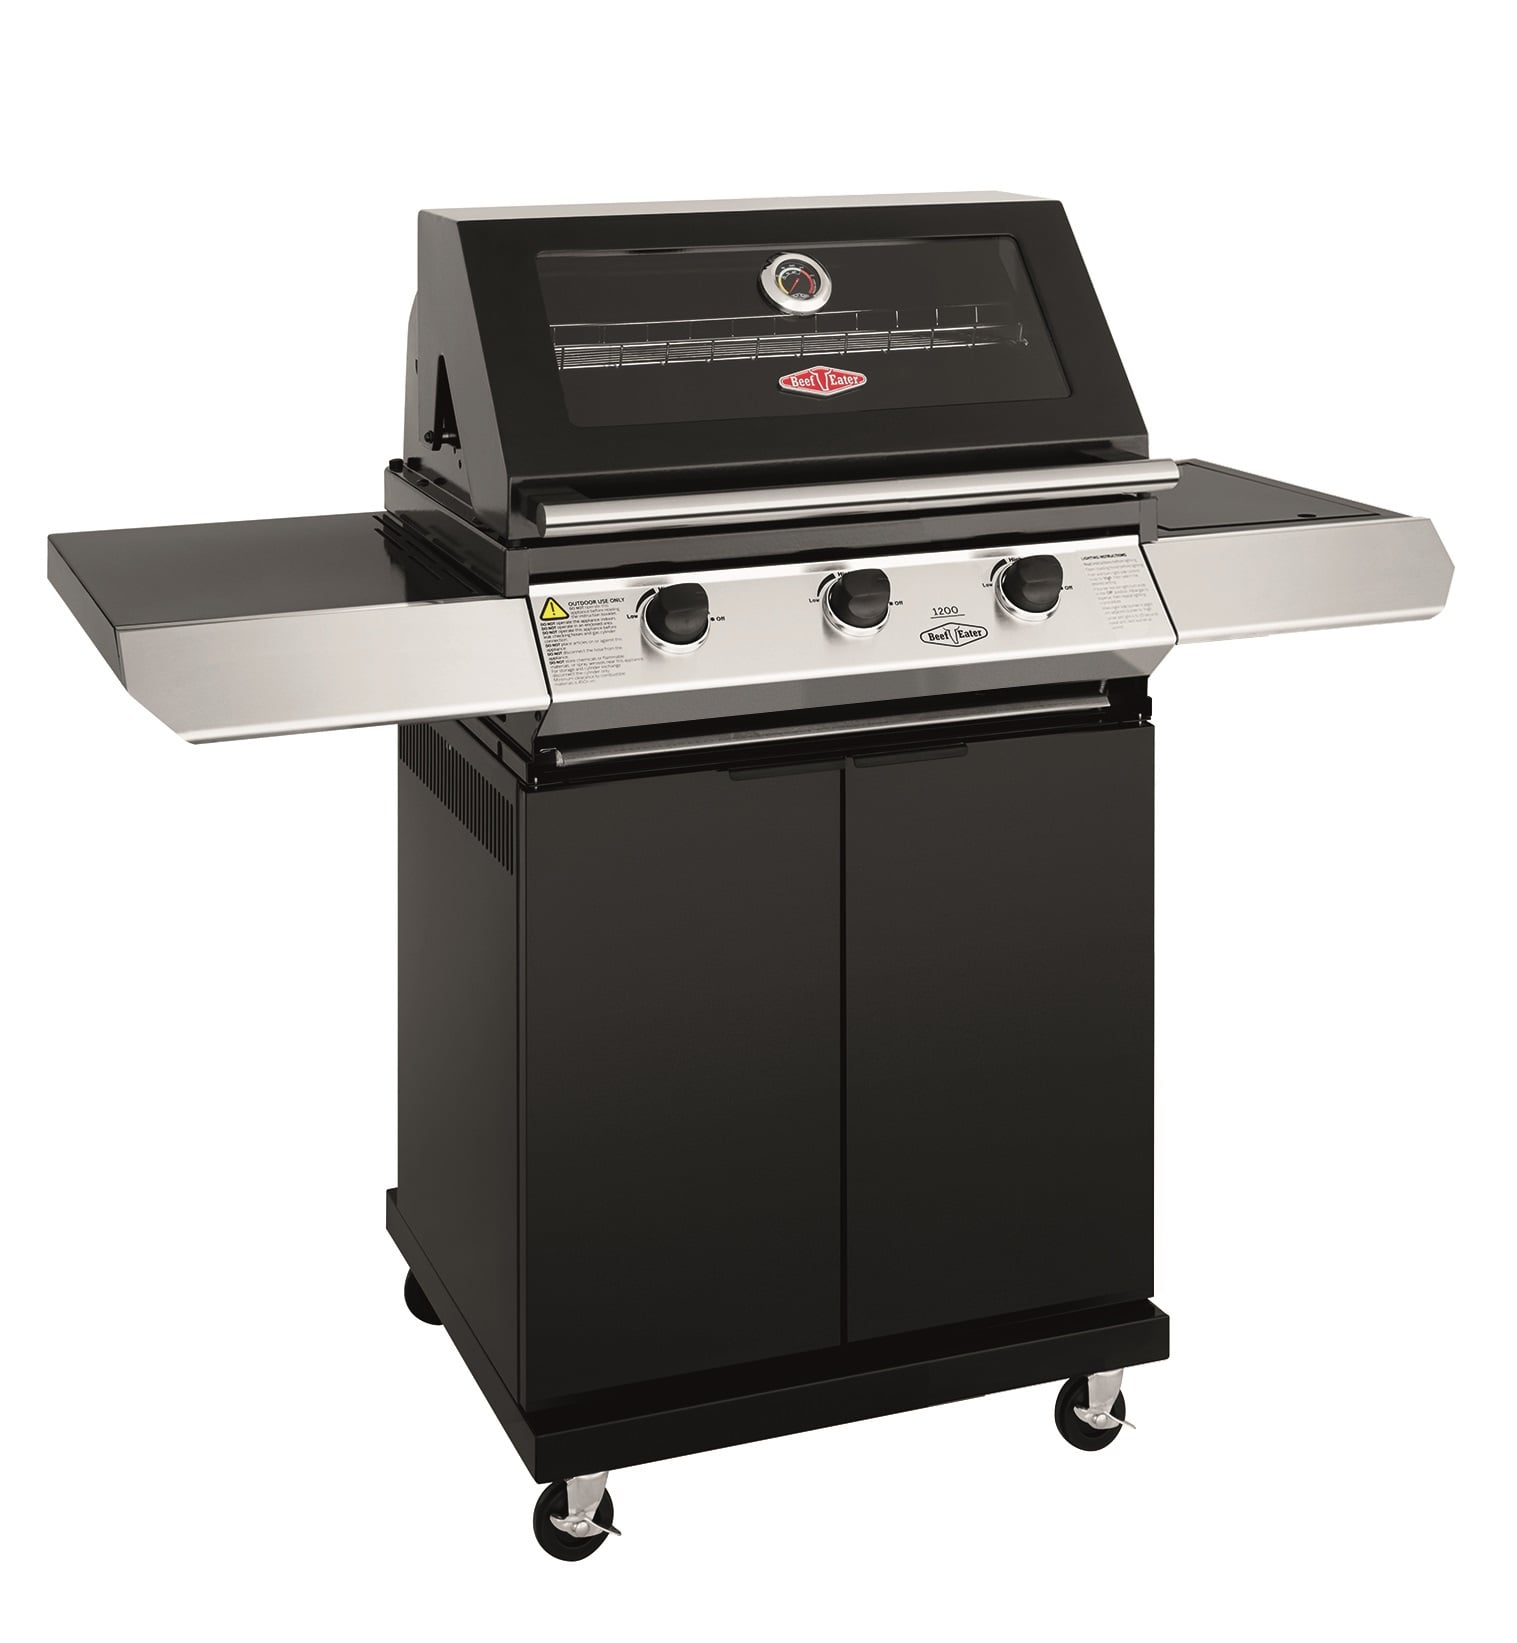 BeefEater 1200E Series - 3 Burner Gas Barbecue and Trolley